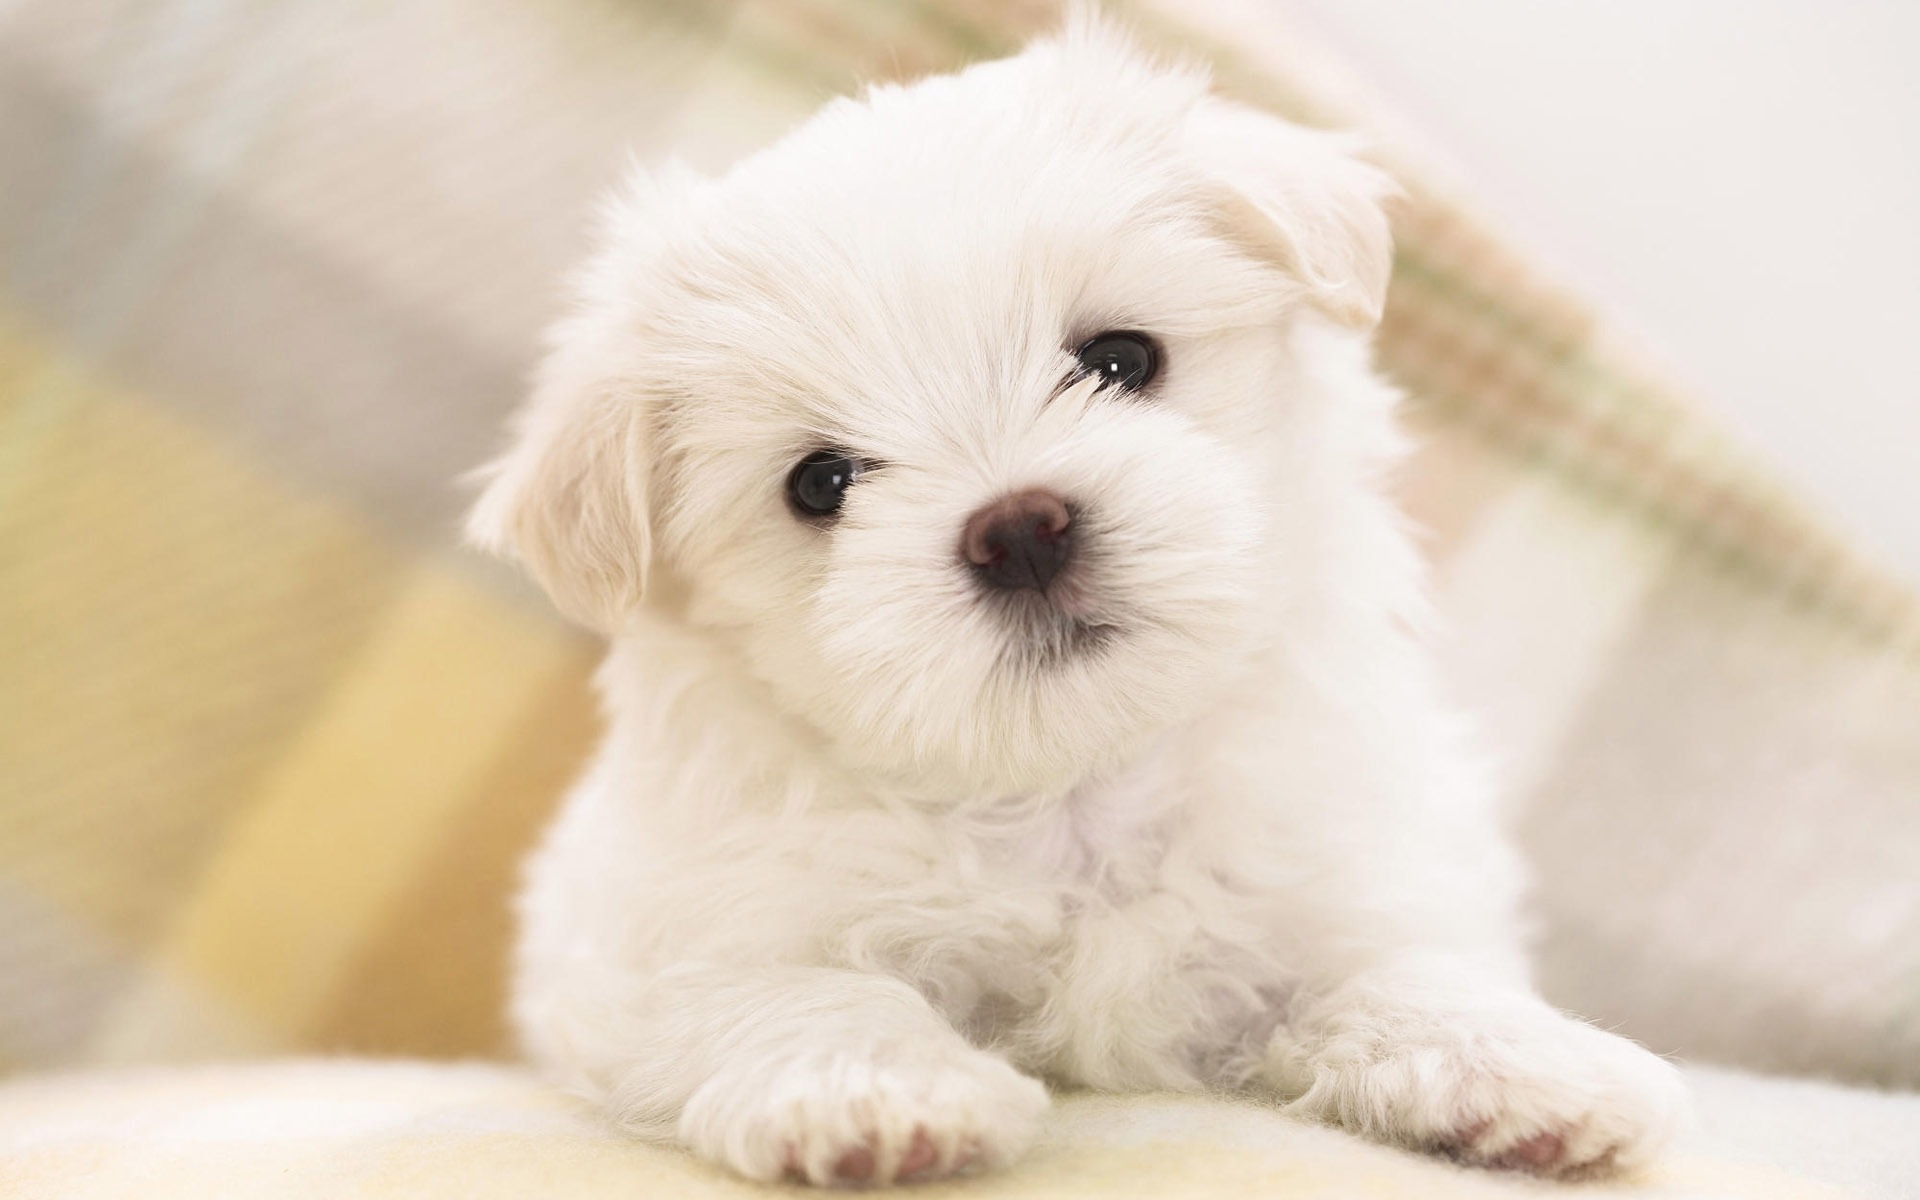 Puppy Photo HD wallpapers (8) #6 - 1920x1200